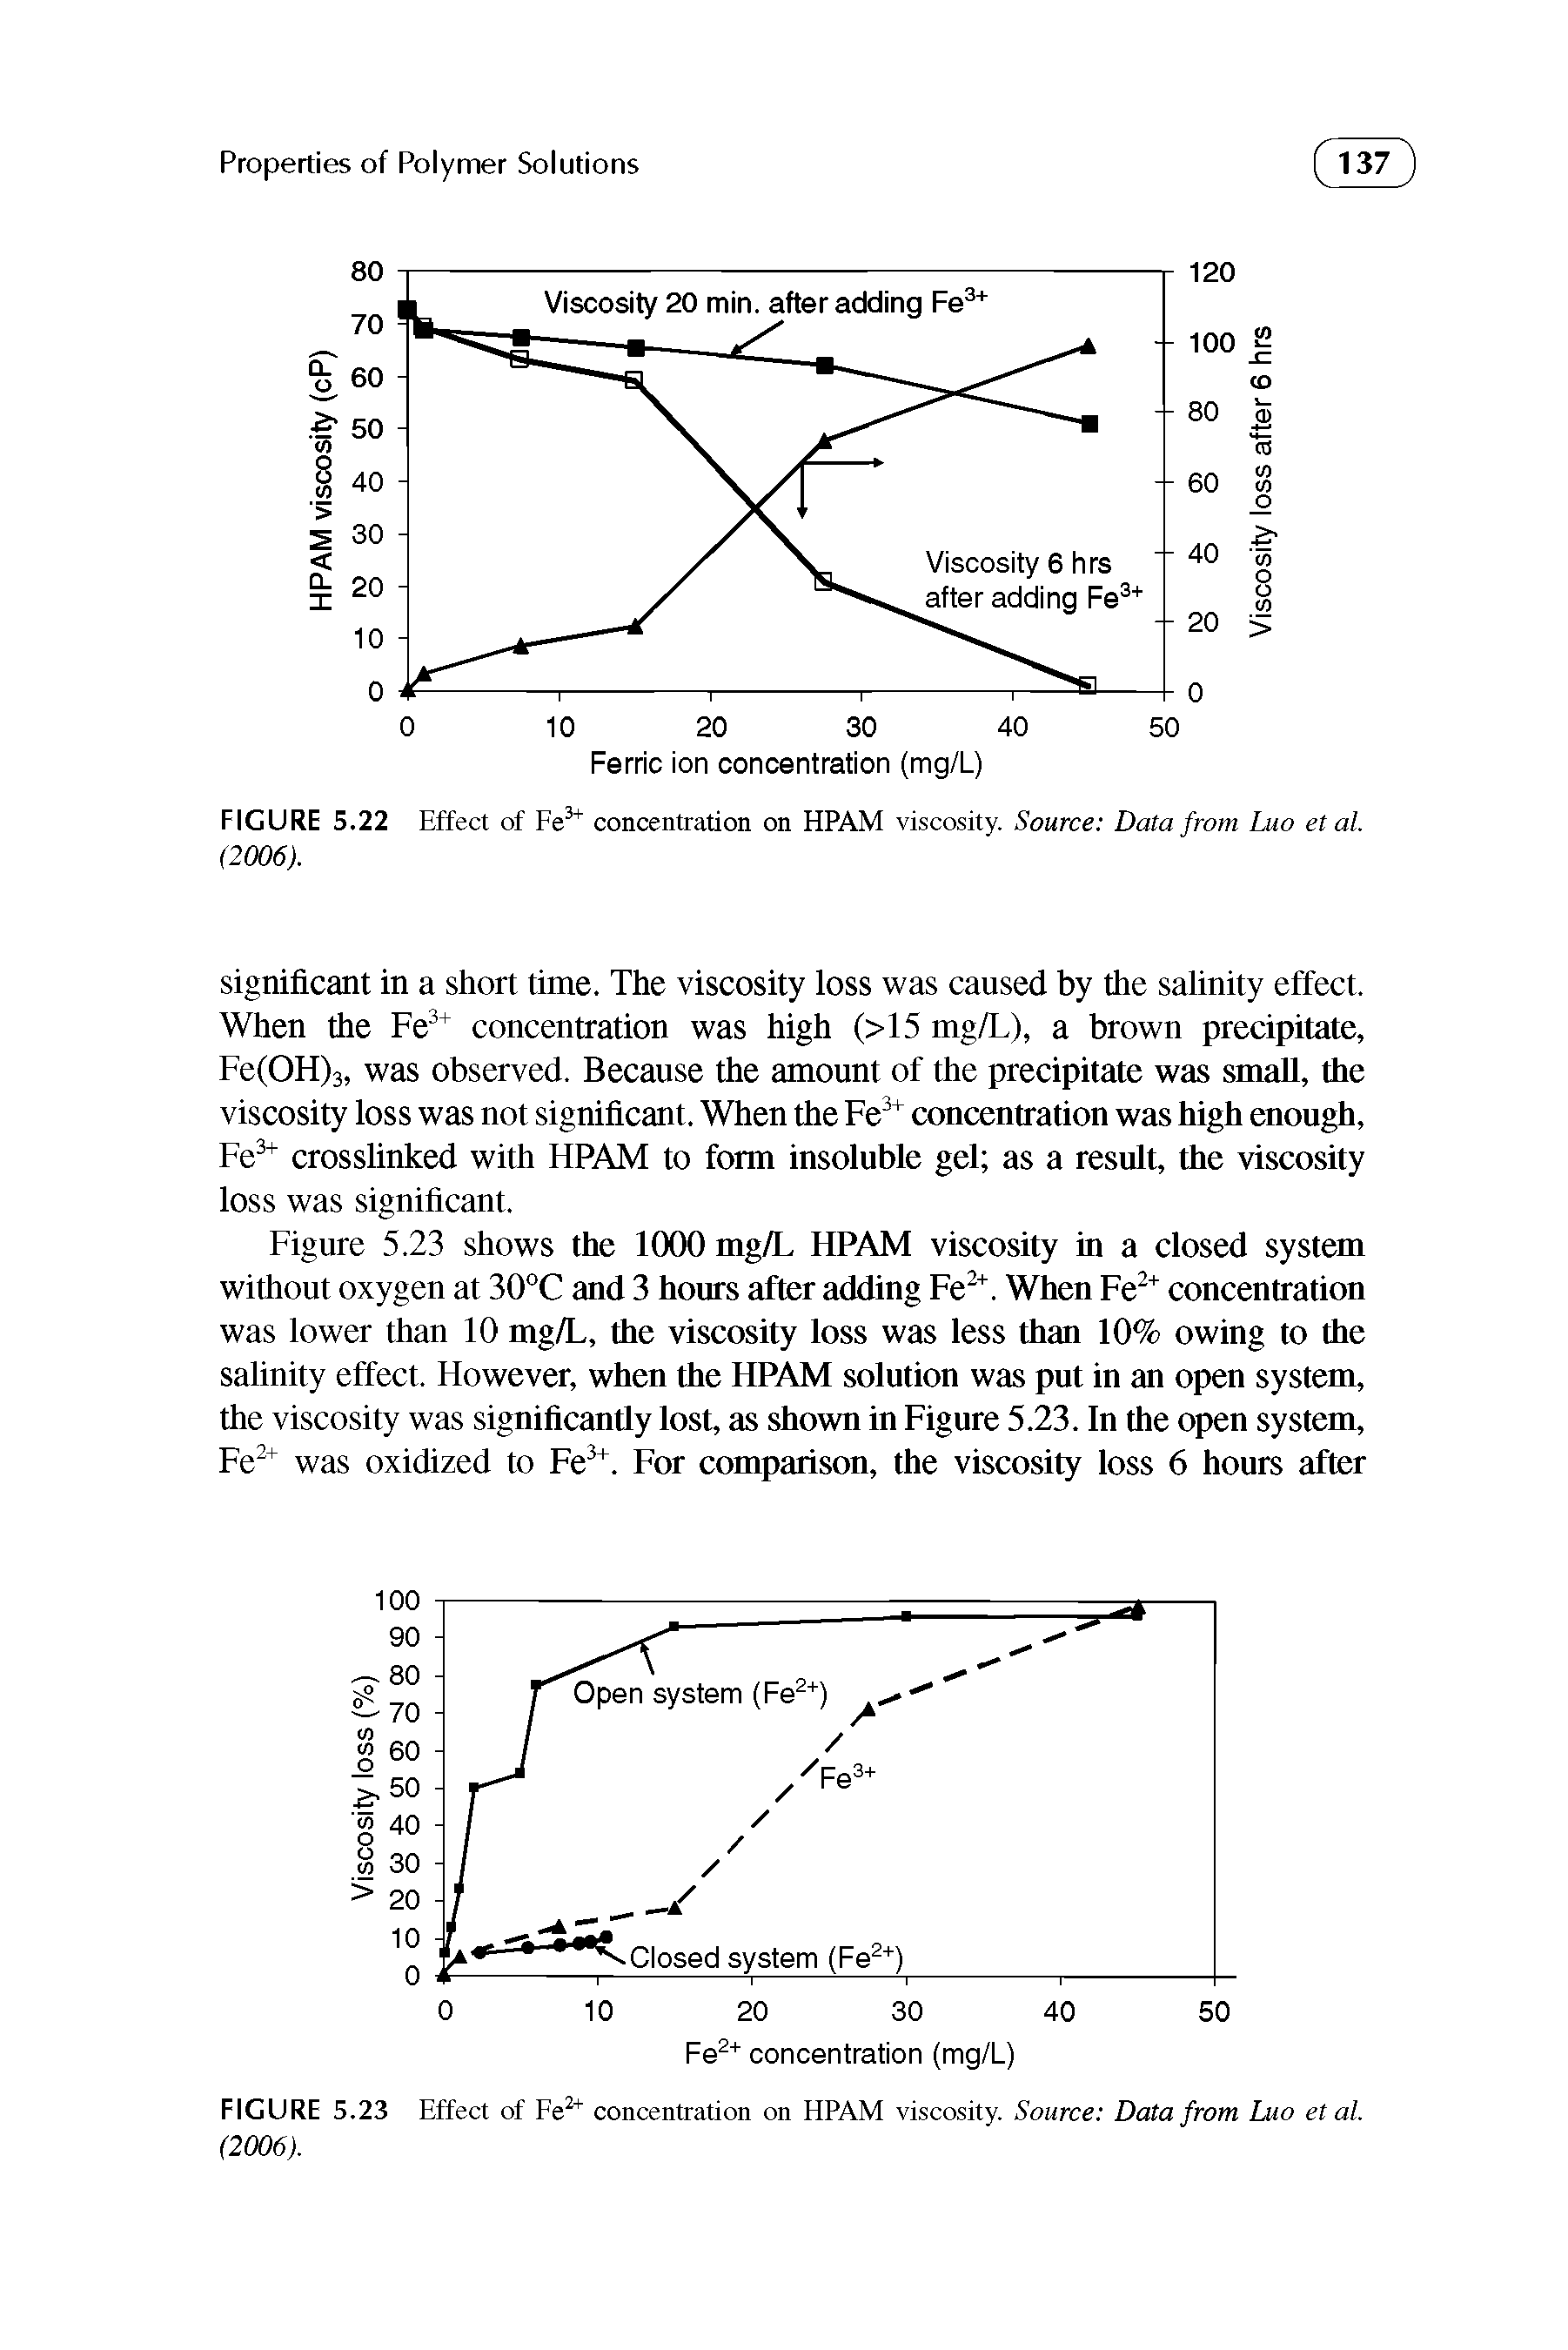 Figure 5.23 shows the 1000 mg/L HPAM viscosity in a closed system without oxygen at 30°C and 3 hours after adding Fe ". When Fe " concentration was lower than 10 mg/L, the viscosity loss was less than 10% owing to the salinity effect. However, when the HPAM solution was put in an open system, the viscosity was significantly lost, as shown in Figure 5.23. In the open system, Fe was oxidized to Fe. For comparison, the viscosity loss 6 hours after...